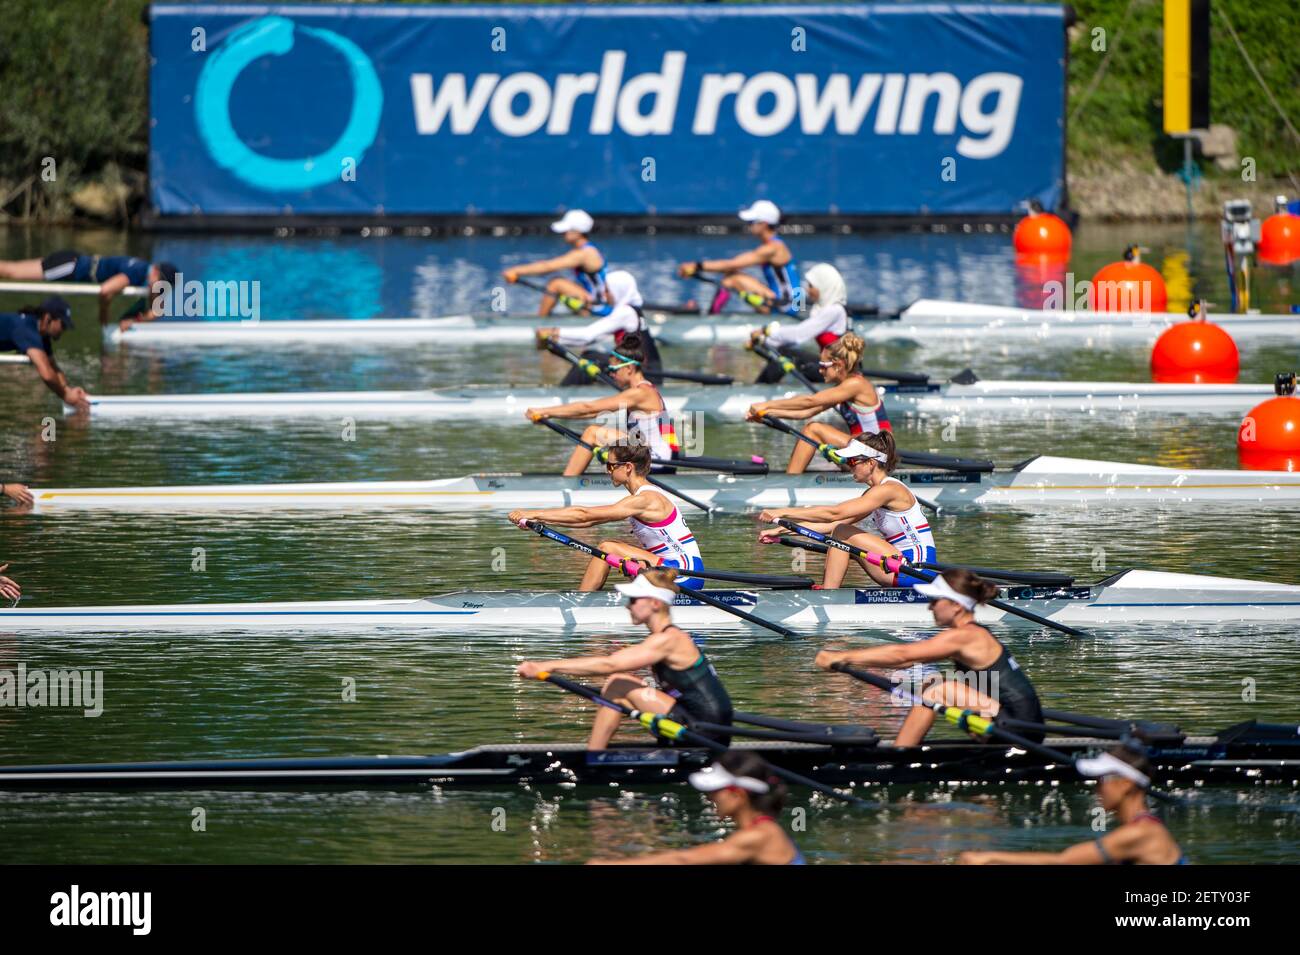 Linz, Austria, Sunday,  24th Aug 2019, FISA World Rowing Championship, Regatta, USA LW2X, Bow Michelle SECHSER, Christine CAVALLO, moving away, from the start pontoon, in their heat,  [Mandatory Credit; Peter SPURRIER/Intersport Images]  11:36:45, Sunday Stock Photo